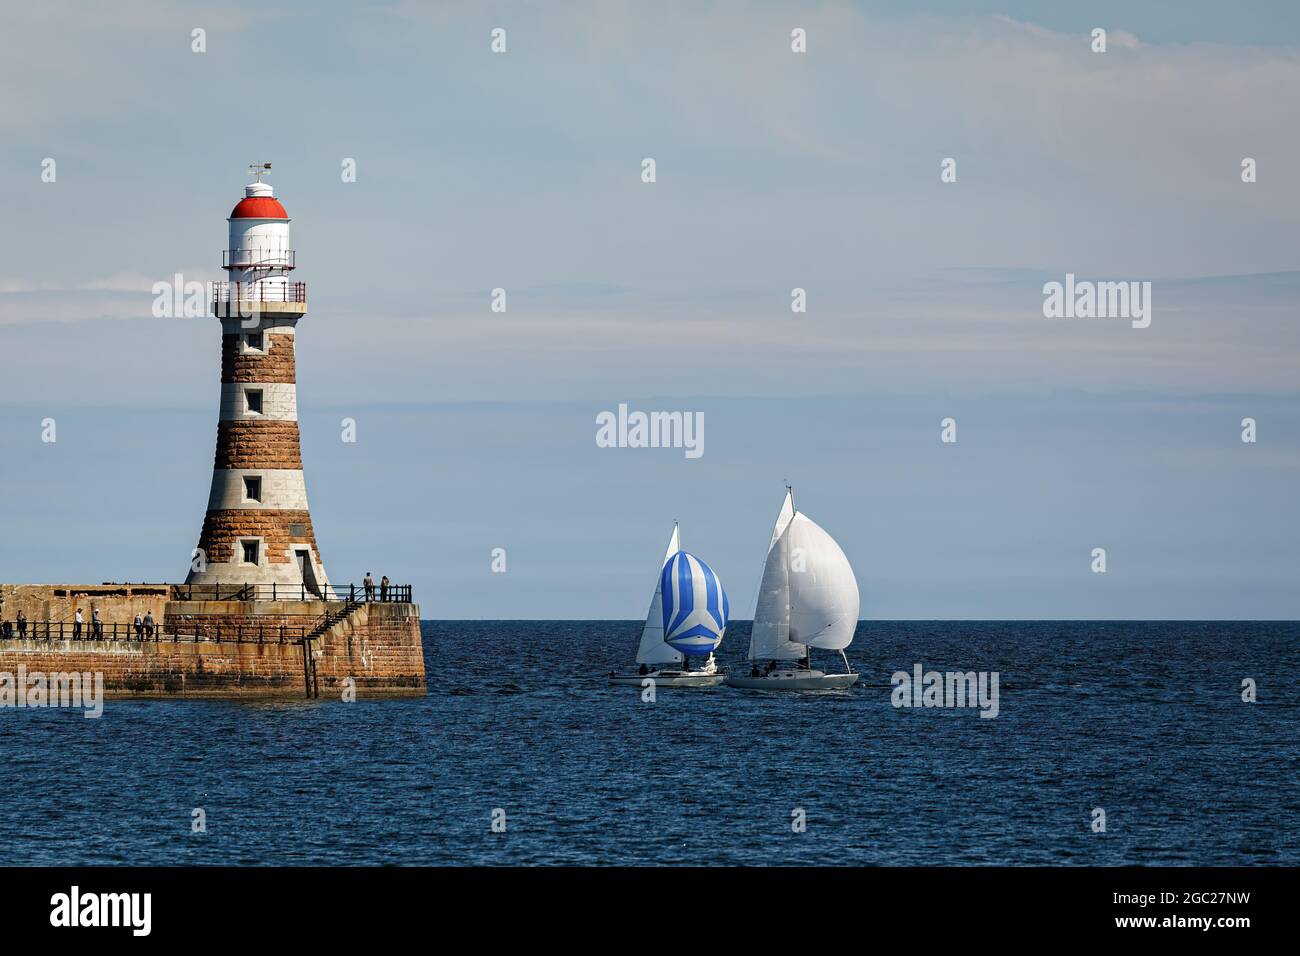 Roker Lighthouse and Yachts Stock Photo